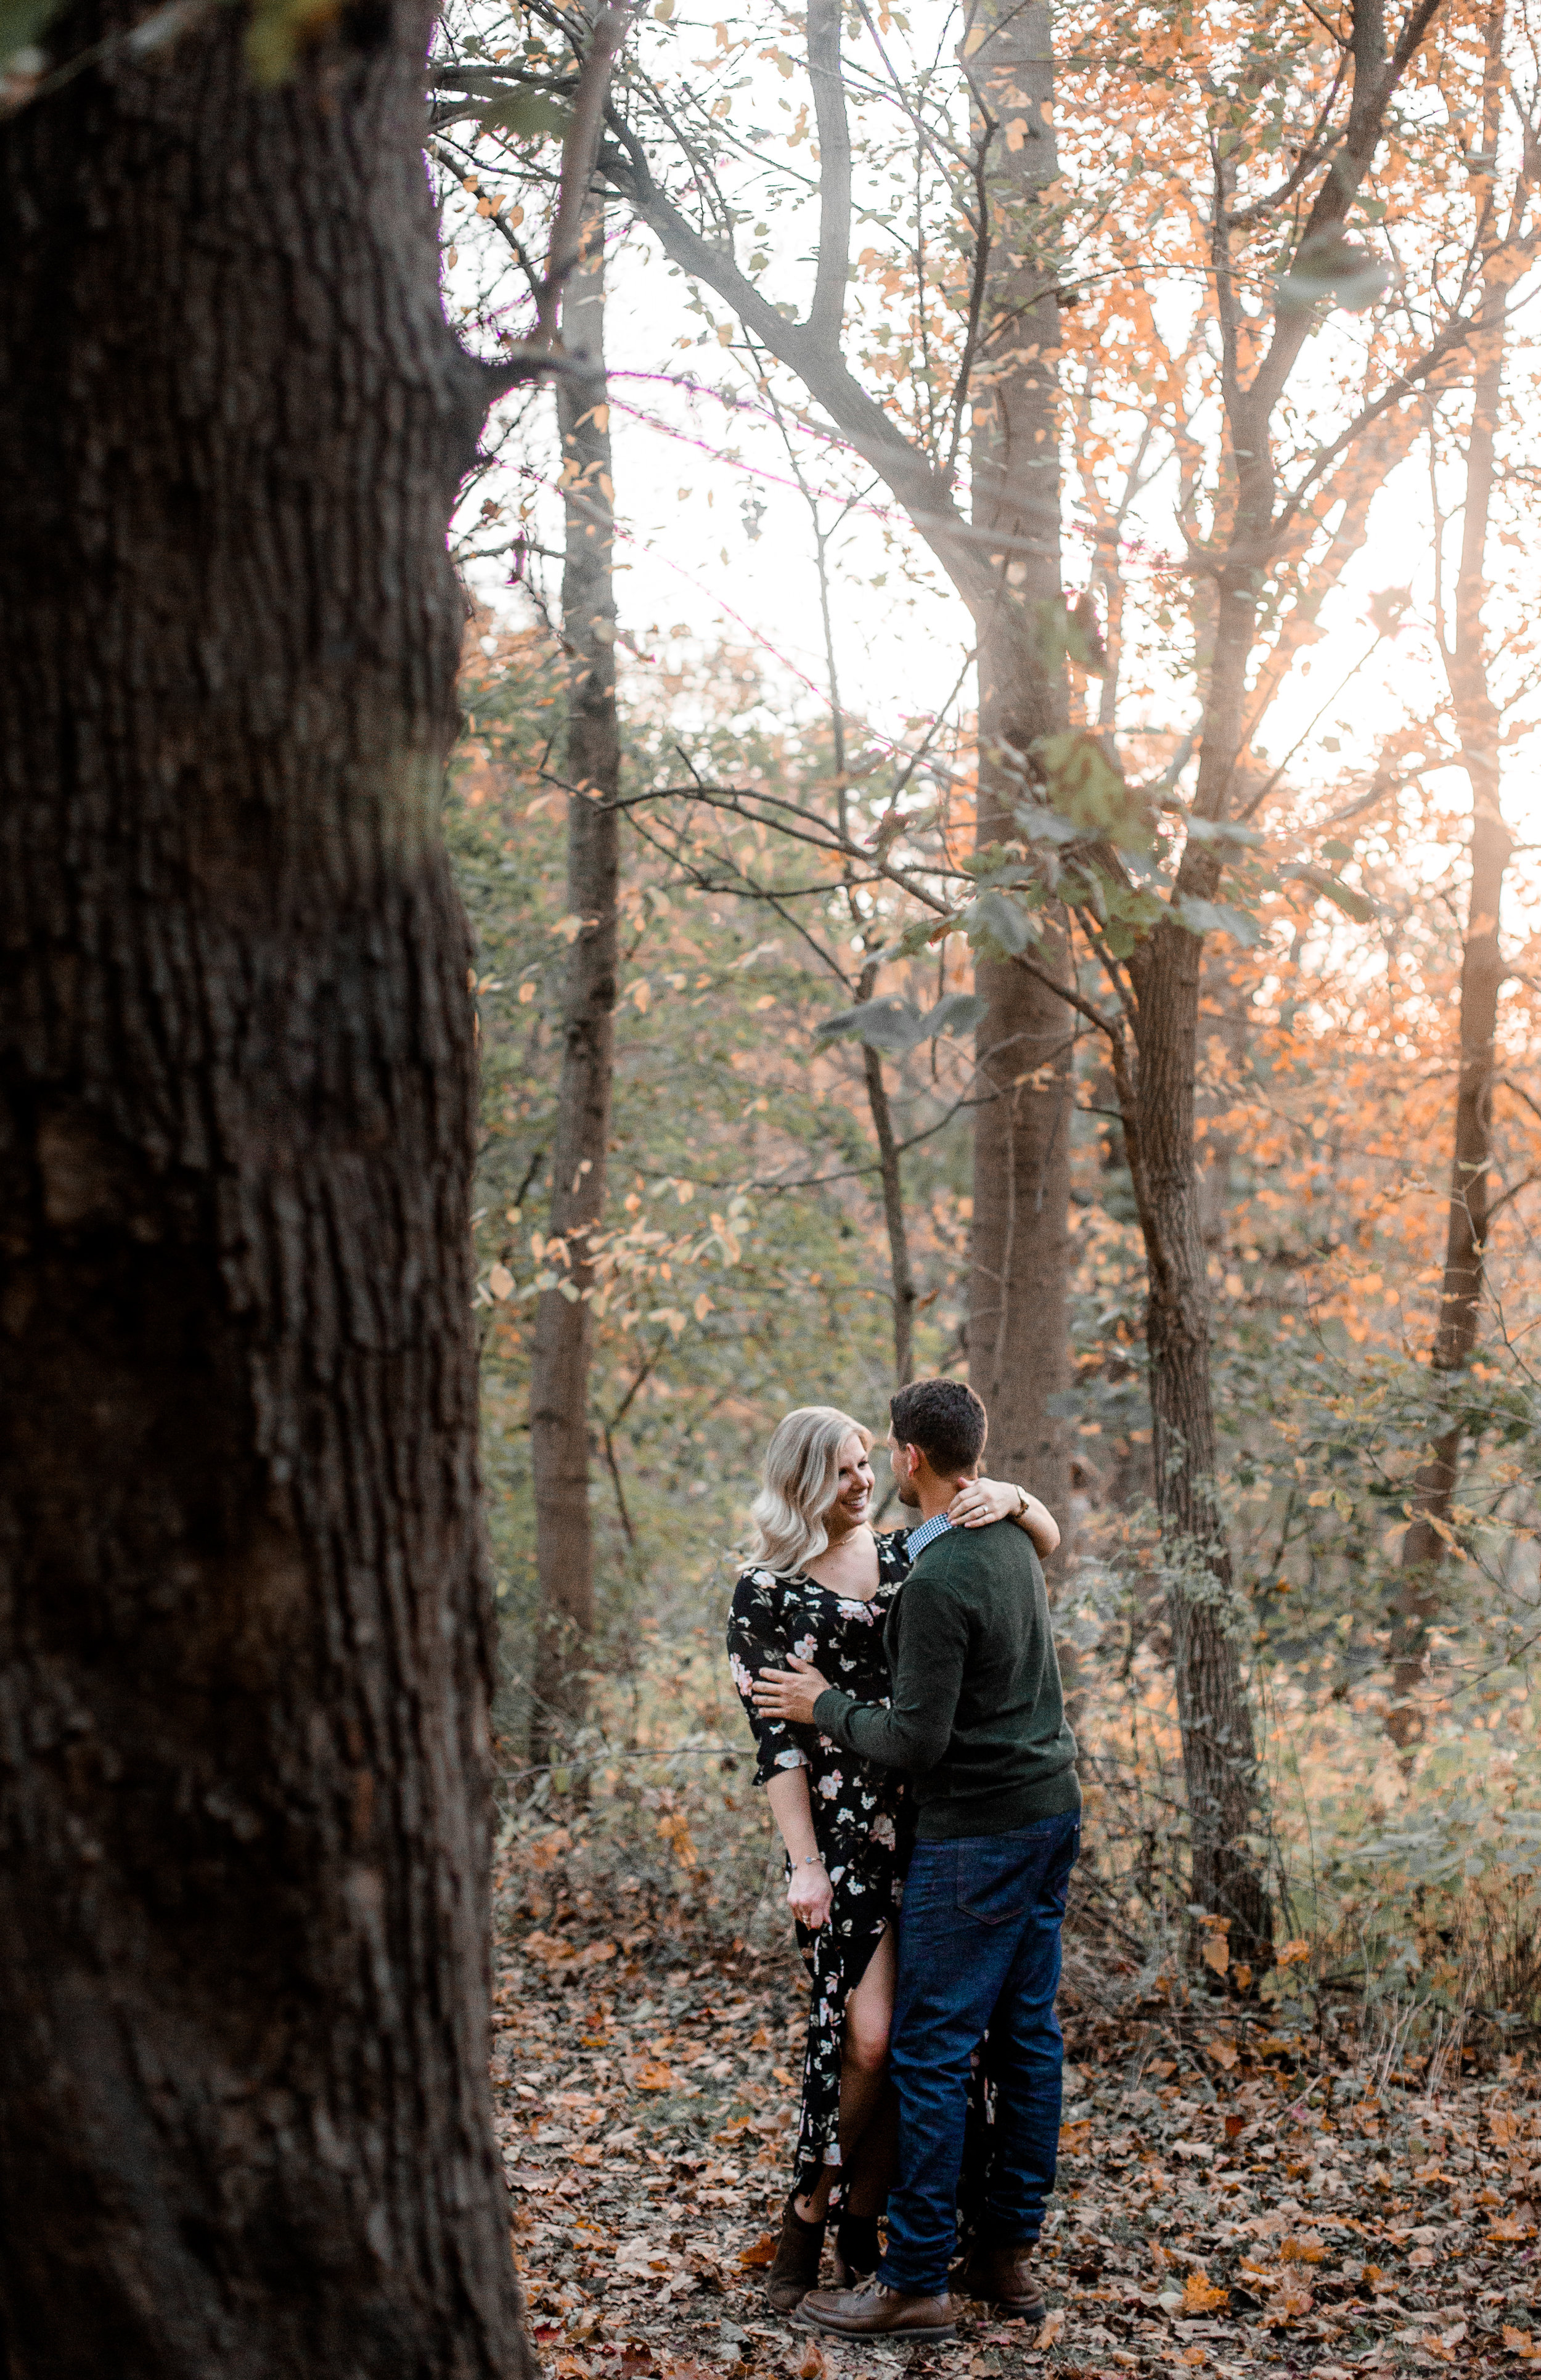 nicole-daacke-photography-carefree-bohemian-lancaster-pa-pennsylvania-engagement-photos-engagement-session-golden-sunset-adventure-session-in-lancaster-pa-lancaster-pa-outdoor-wedding-photographer-59.jpg